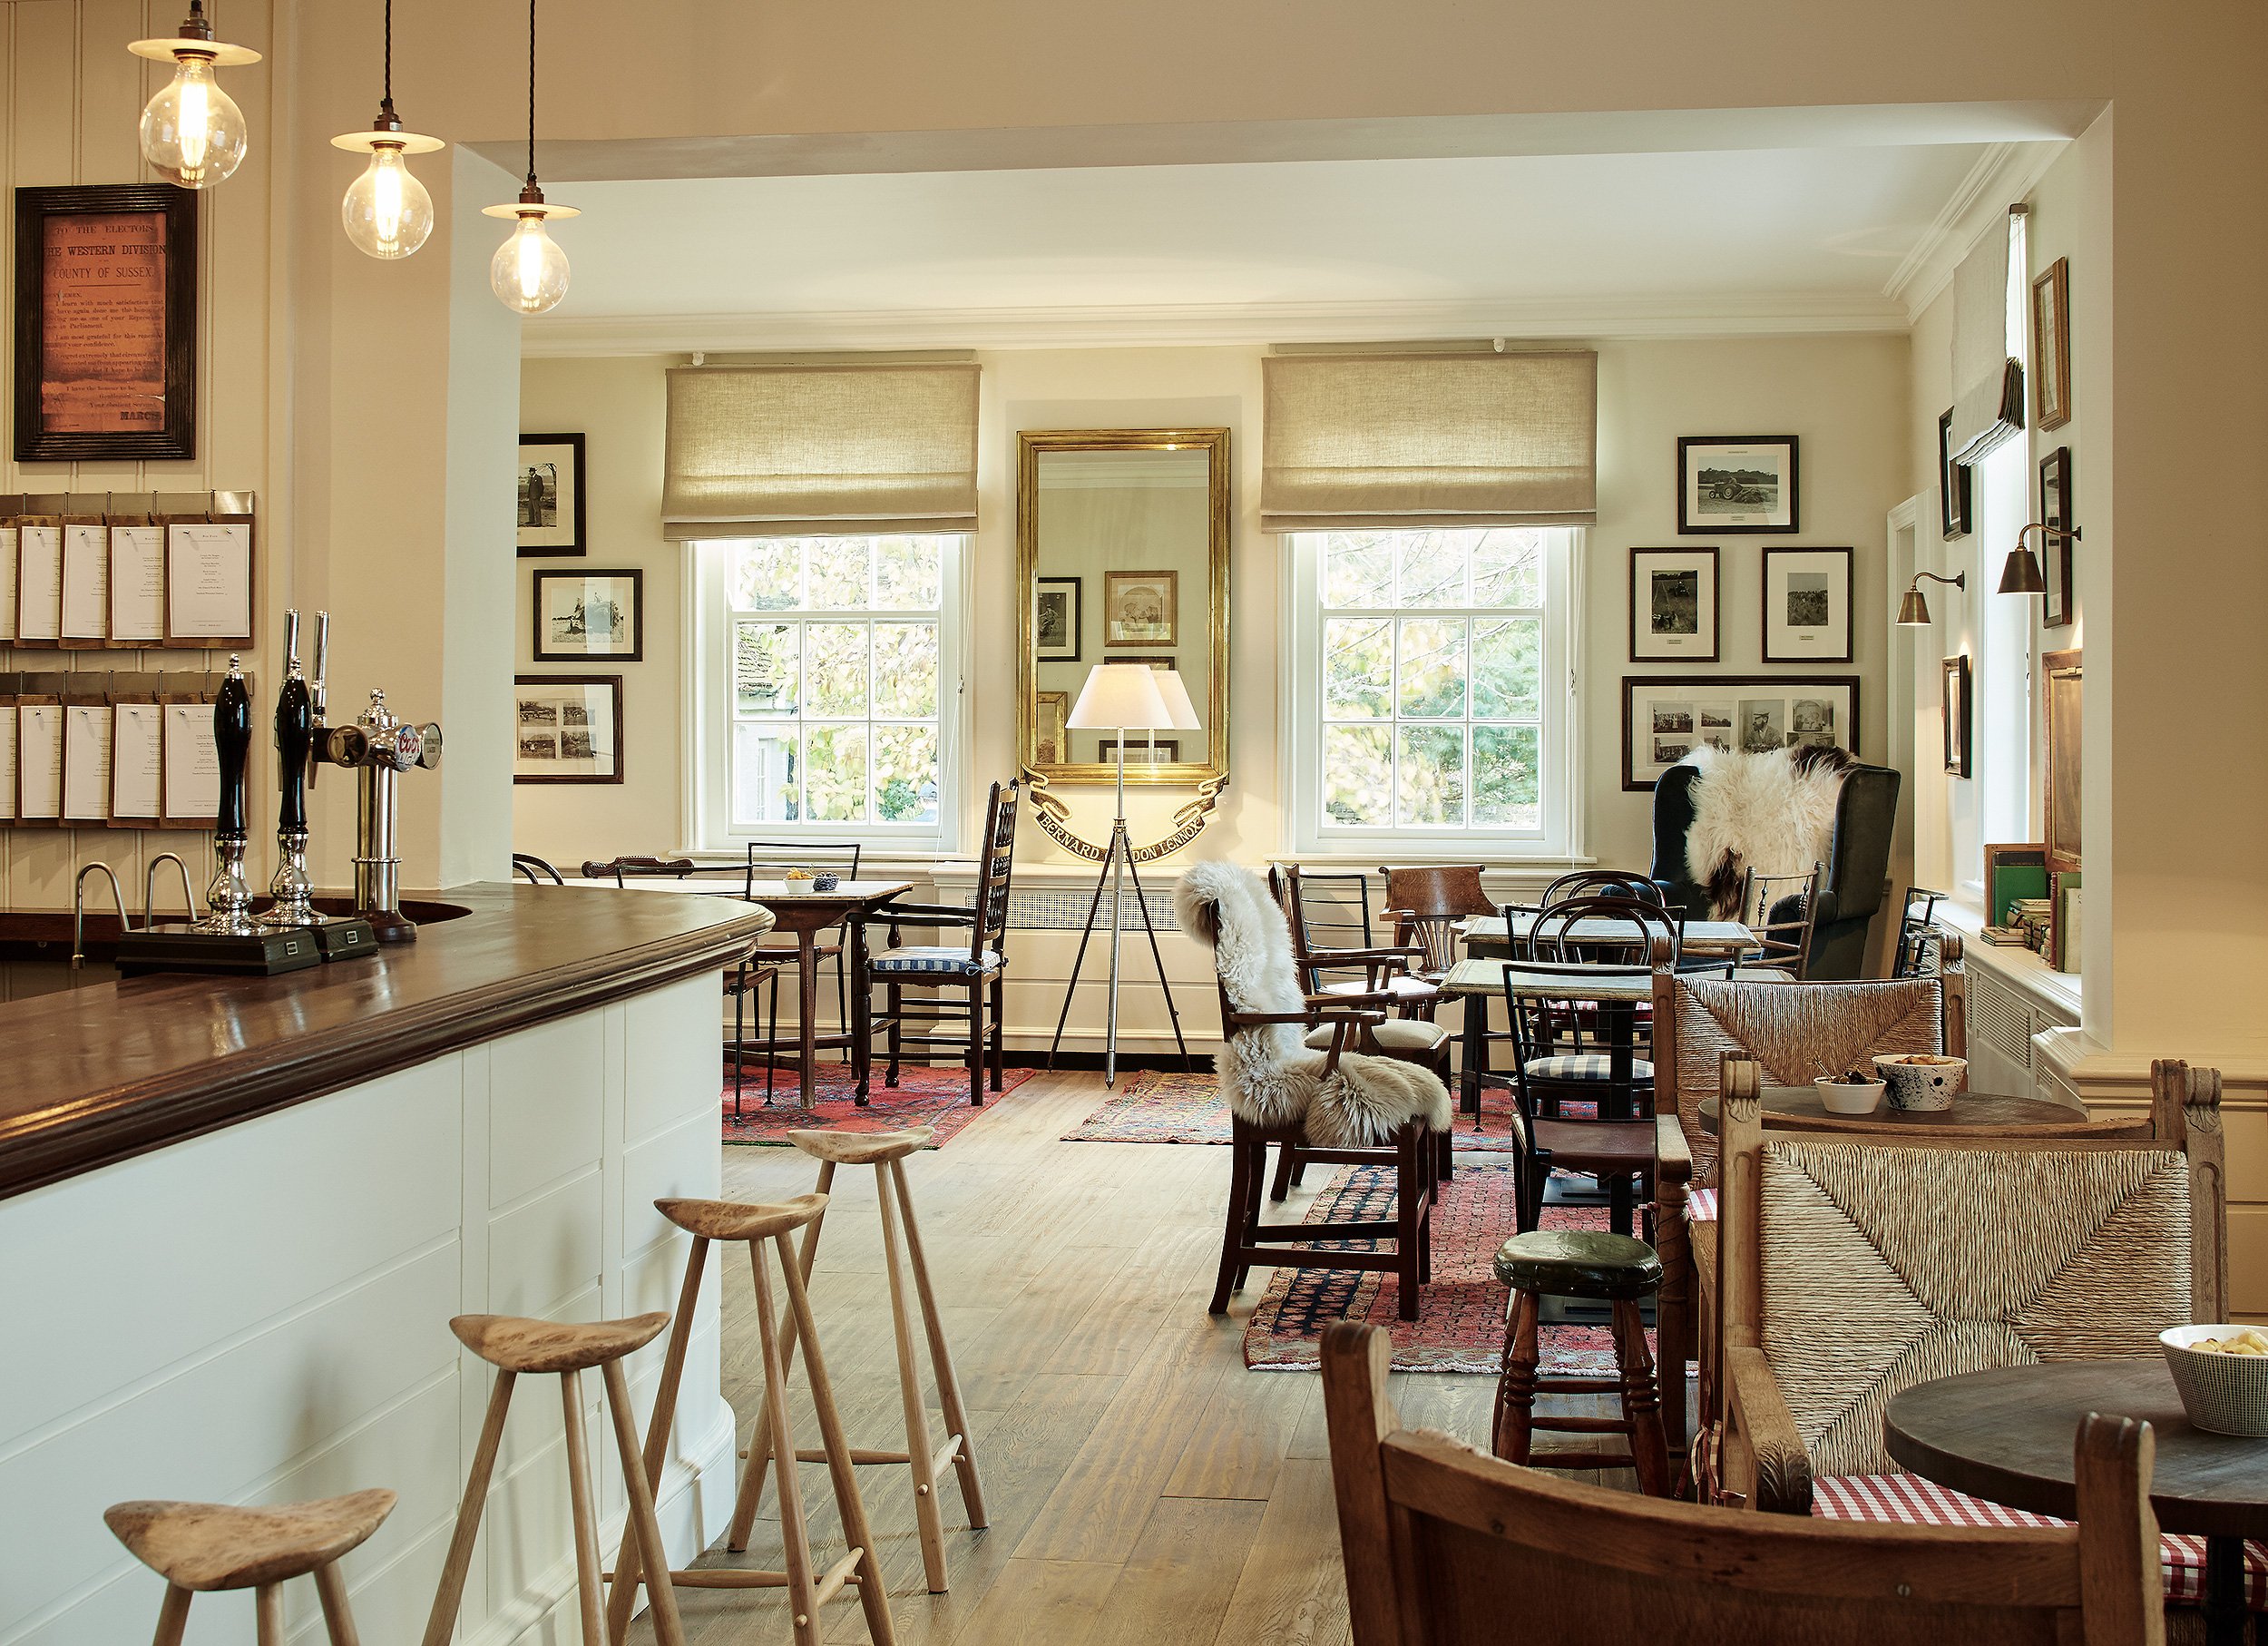 The bar at the Goodwood Hotel, Sussex, UK.  Resort photography by Mike Caldwell